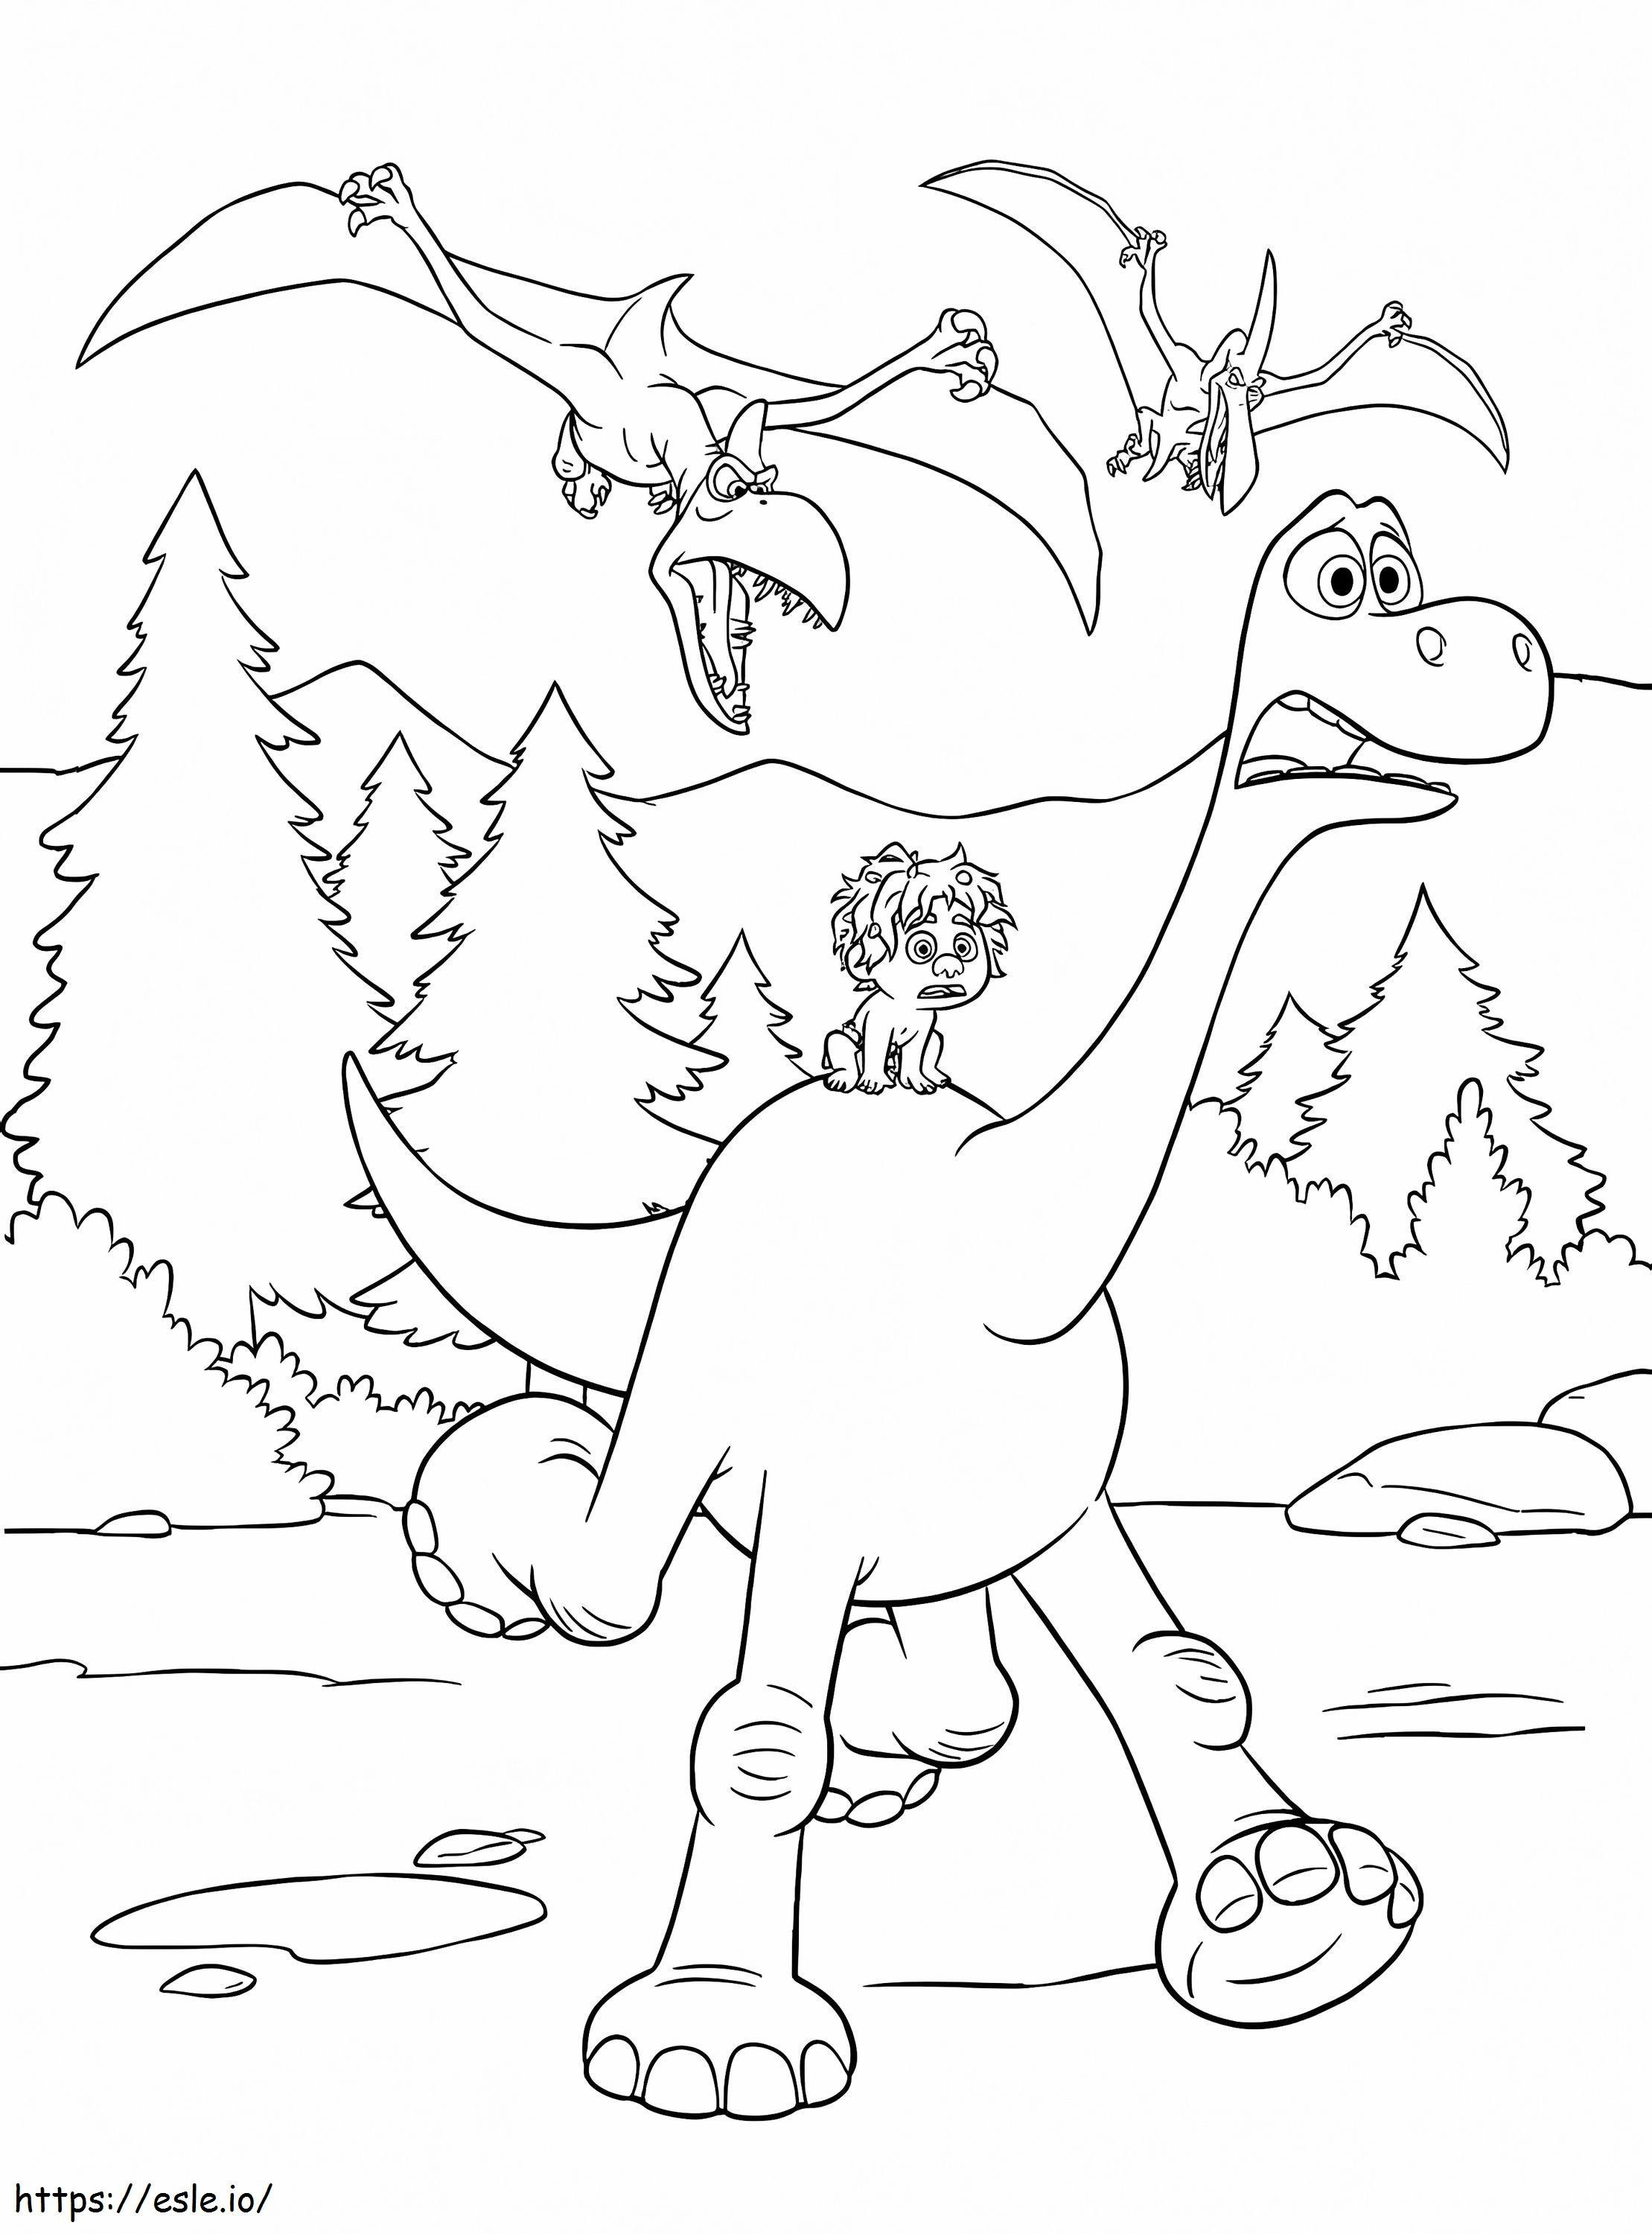 Arlo And Spot Escape From The Pterodactyls coloring page